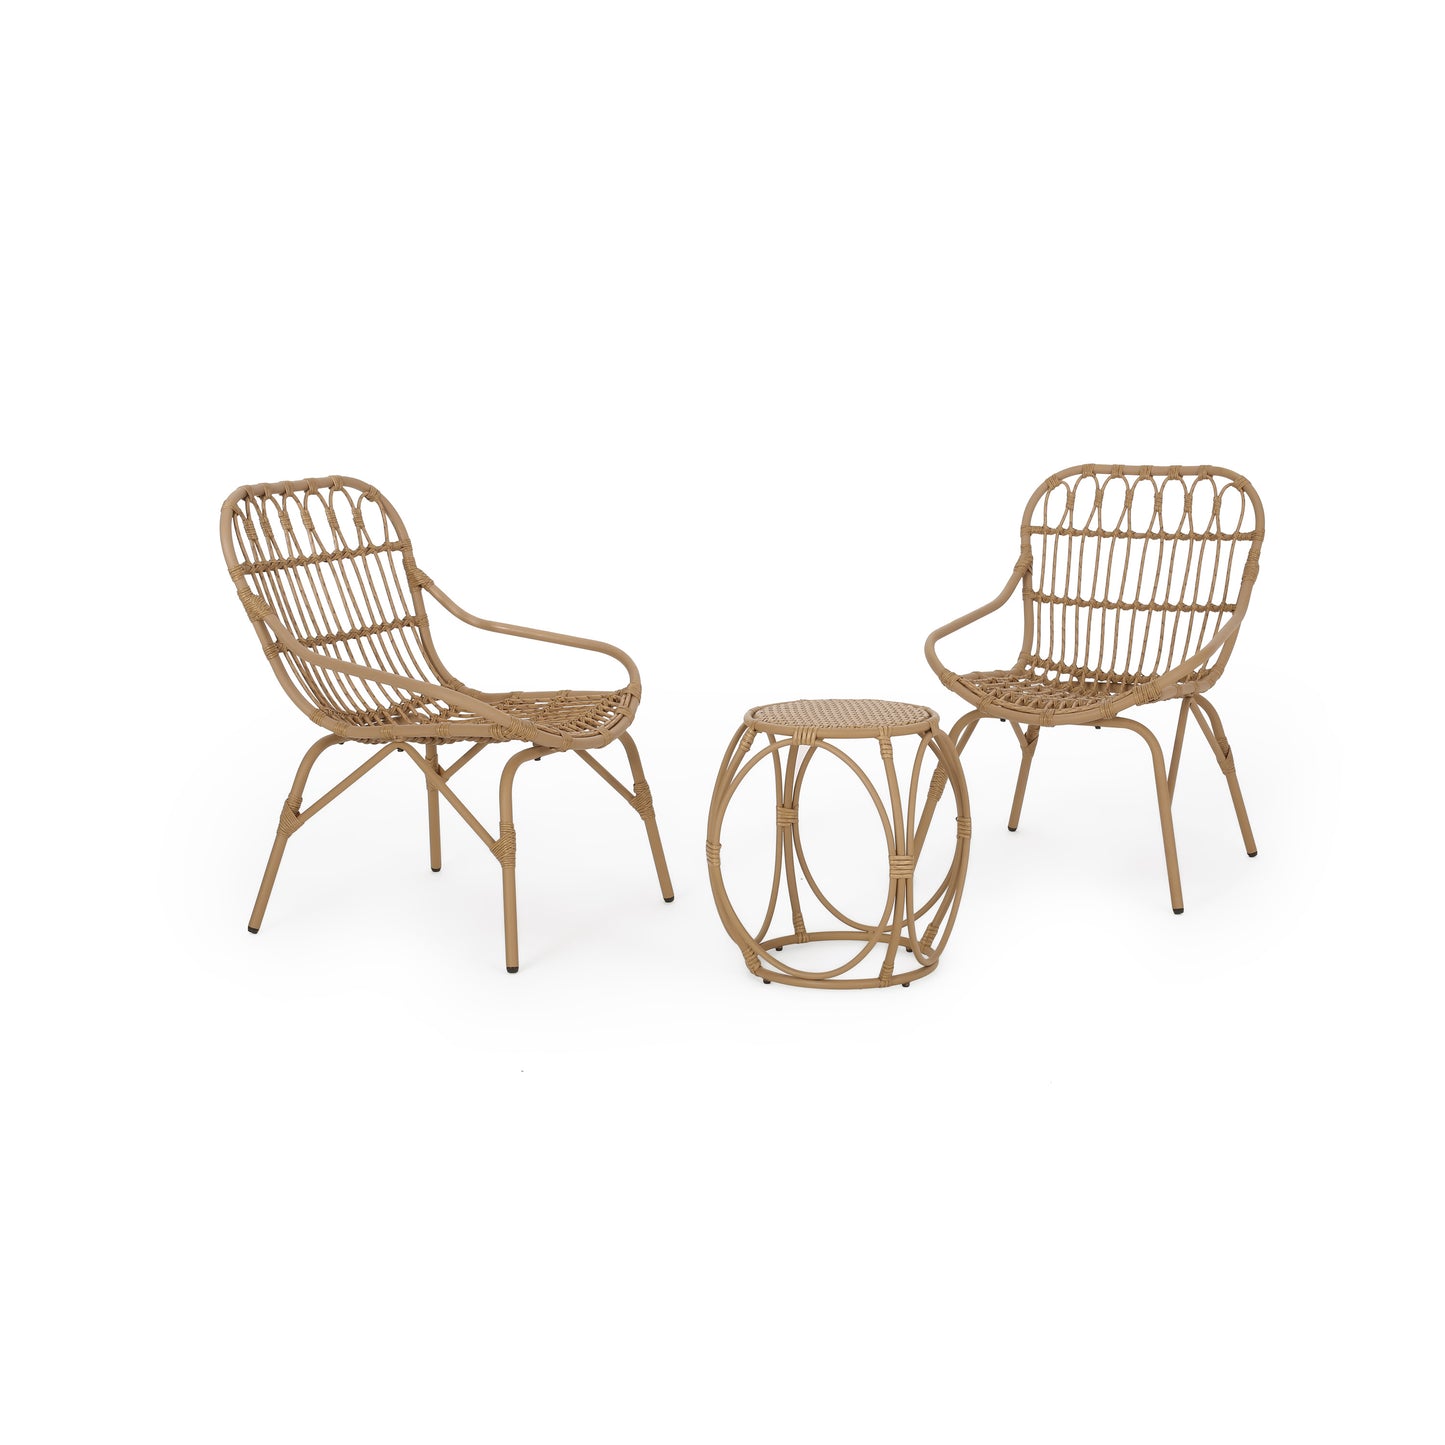 Barrister Outdoor Wicker 3 Piece Chat Set